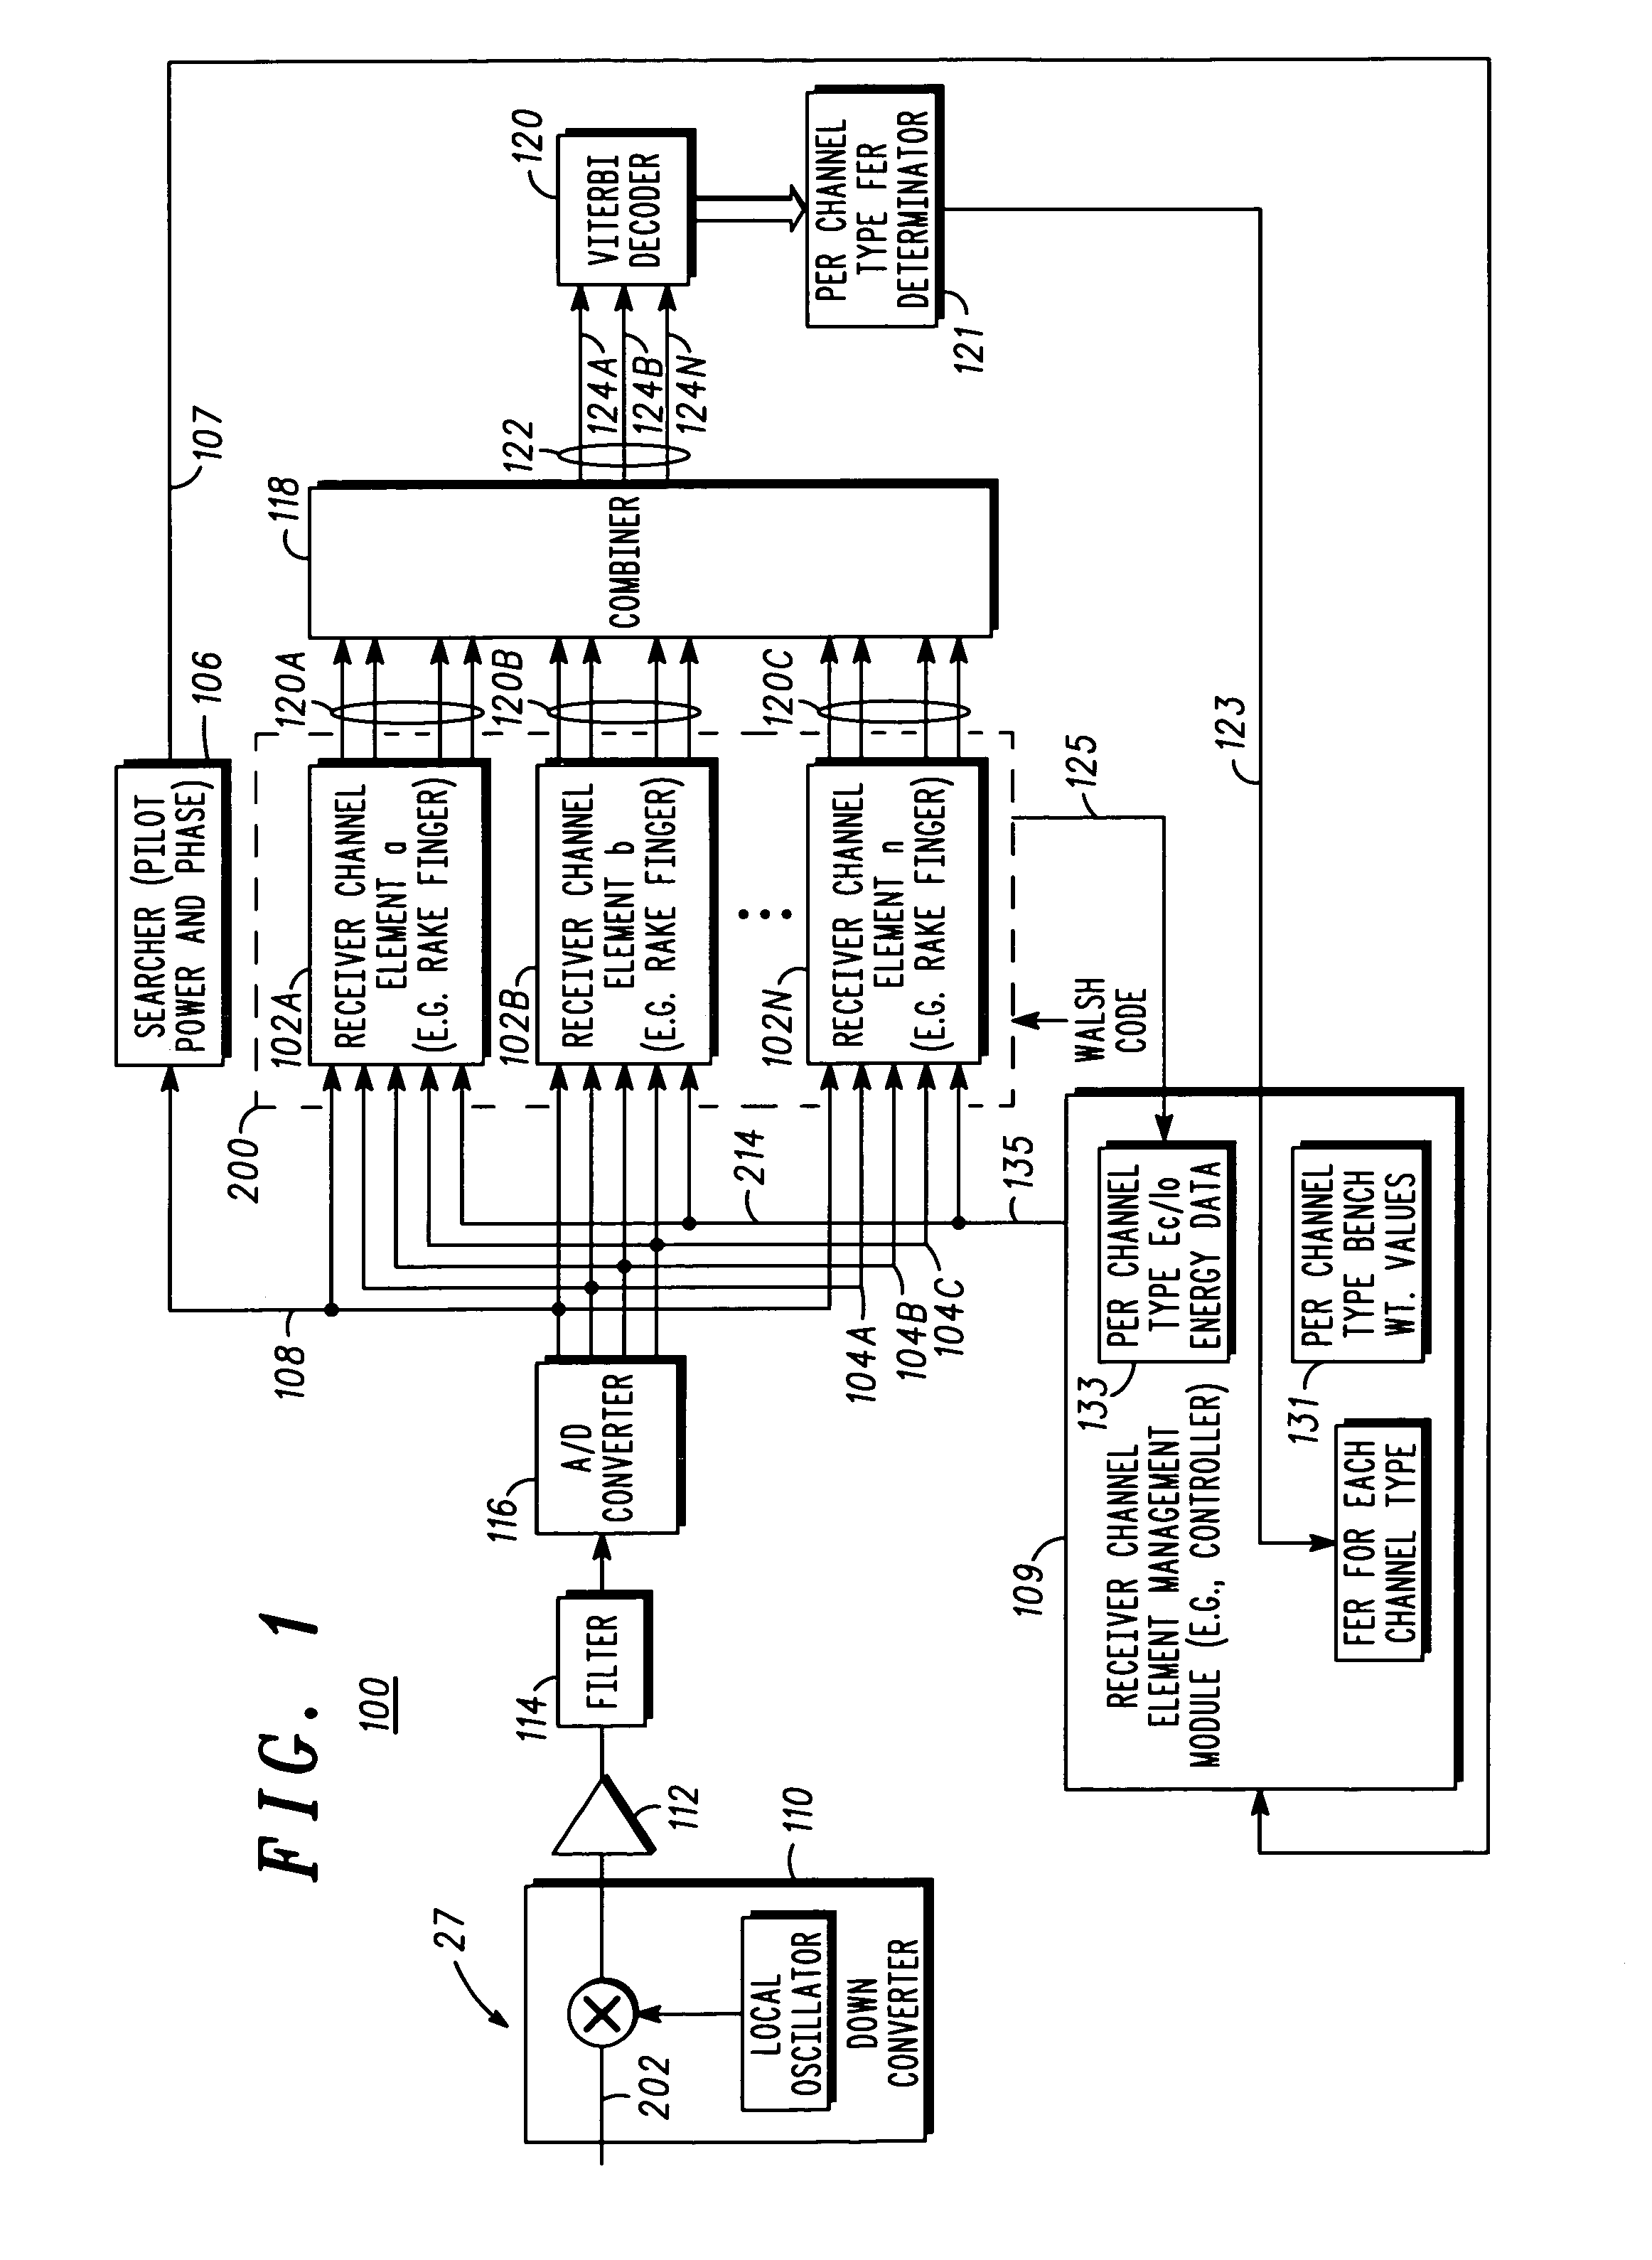 Apparatus for controlling a plurality of receiver fingers in a CDMA receiver